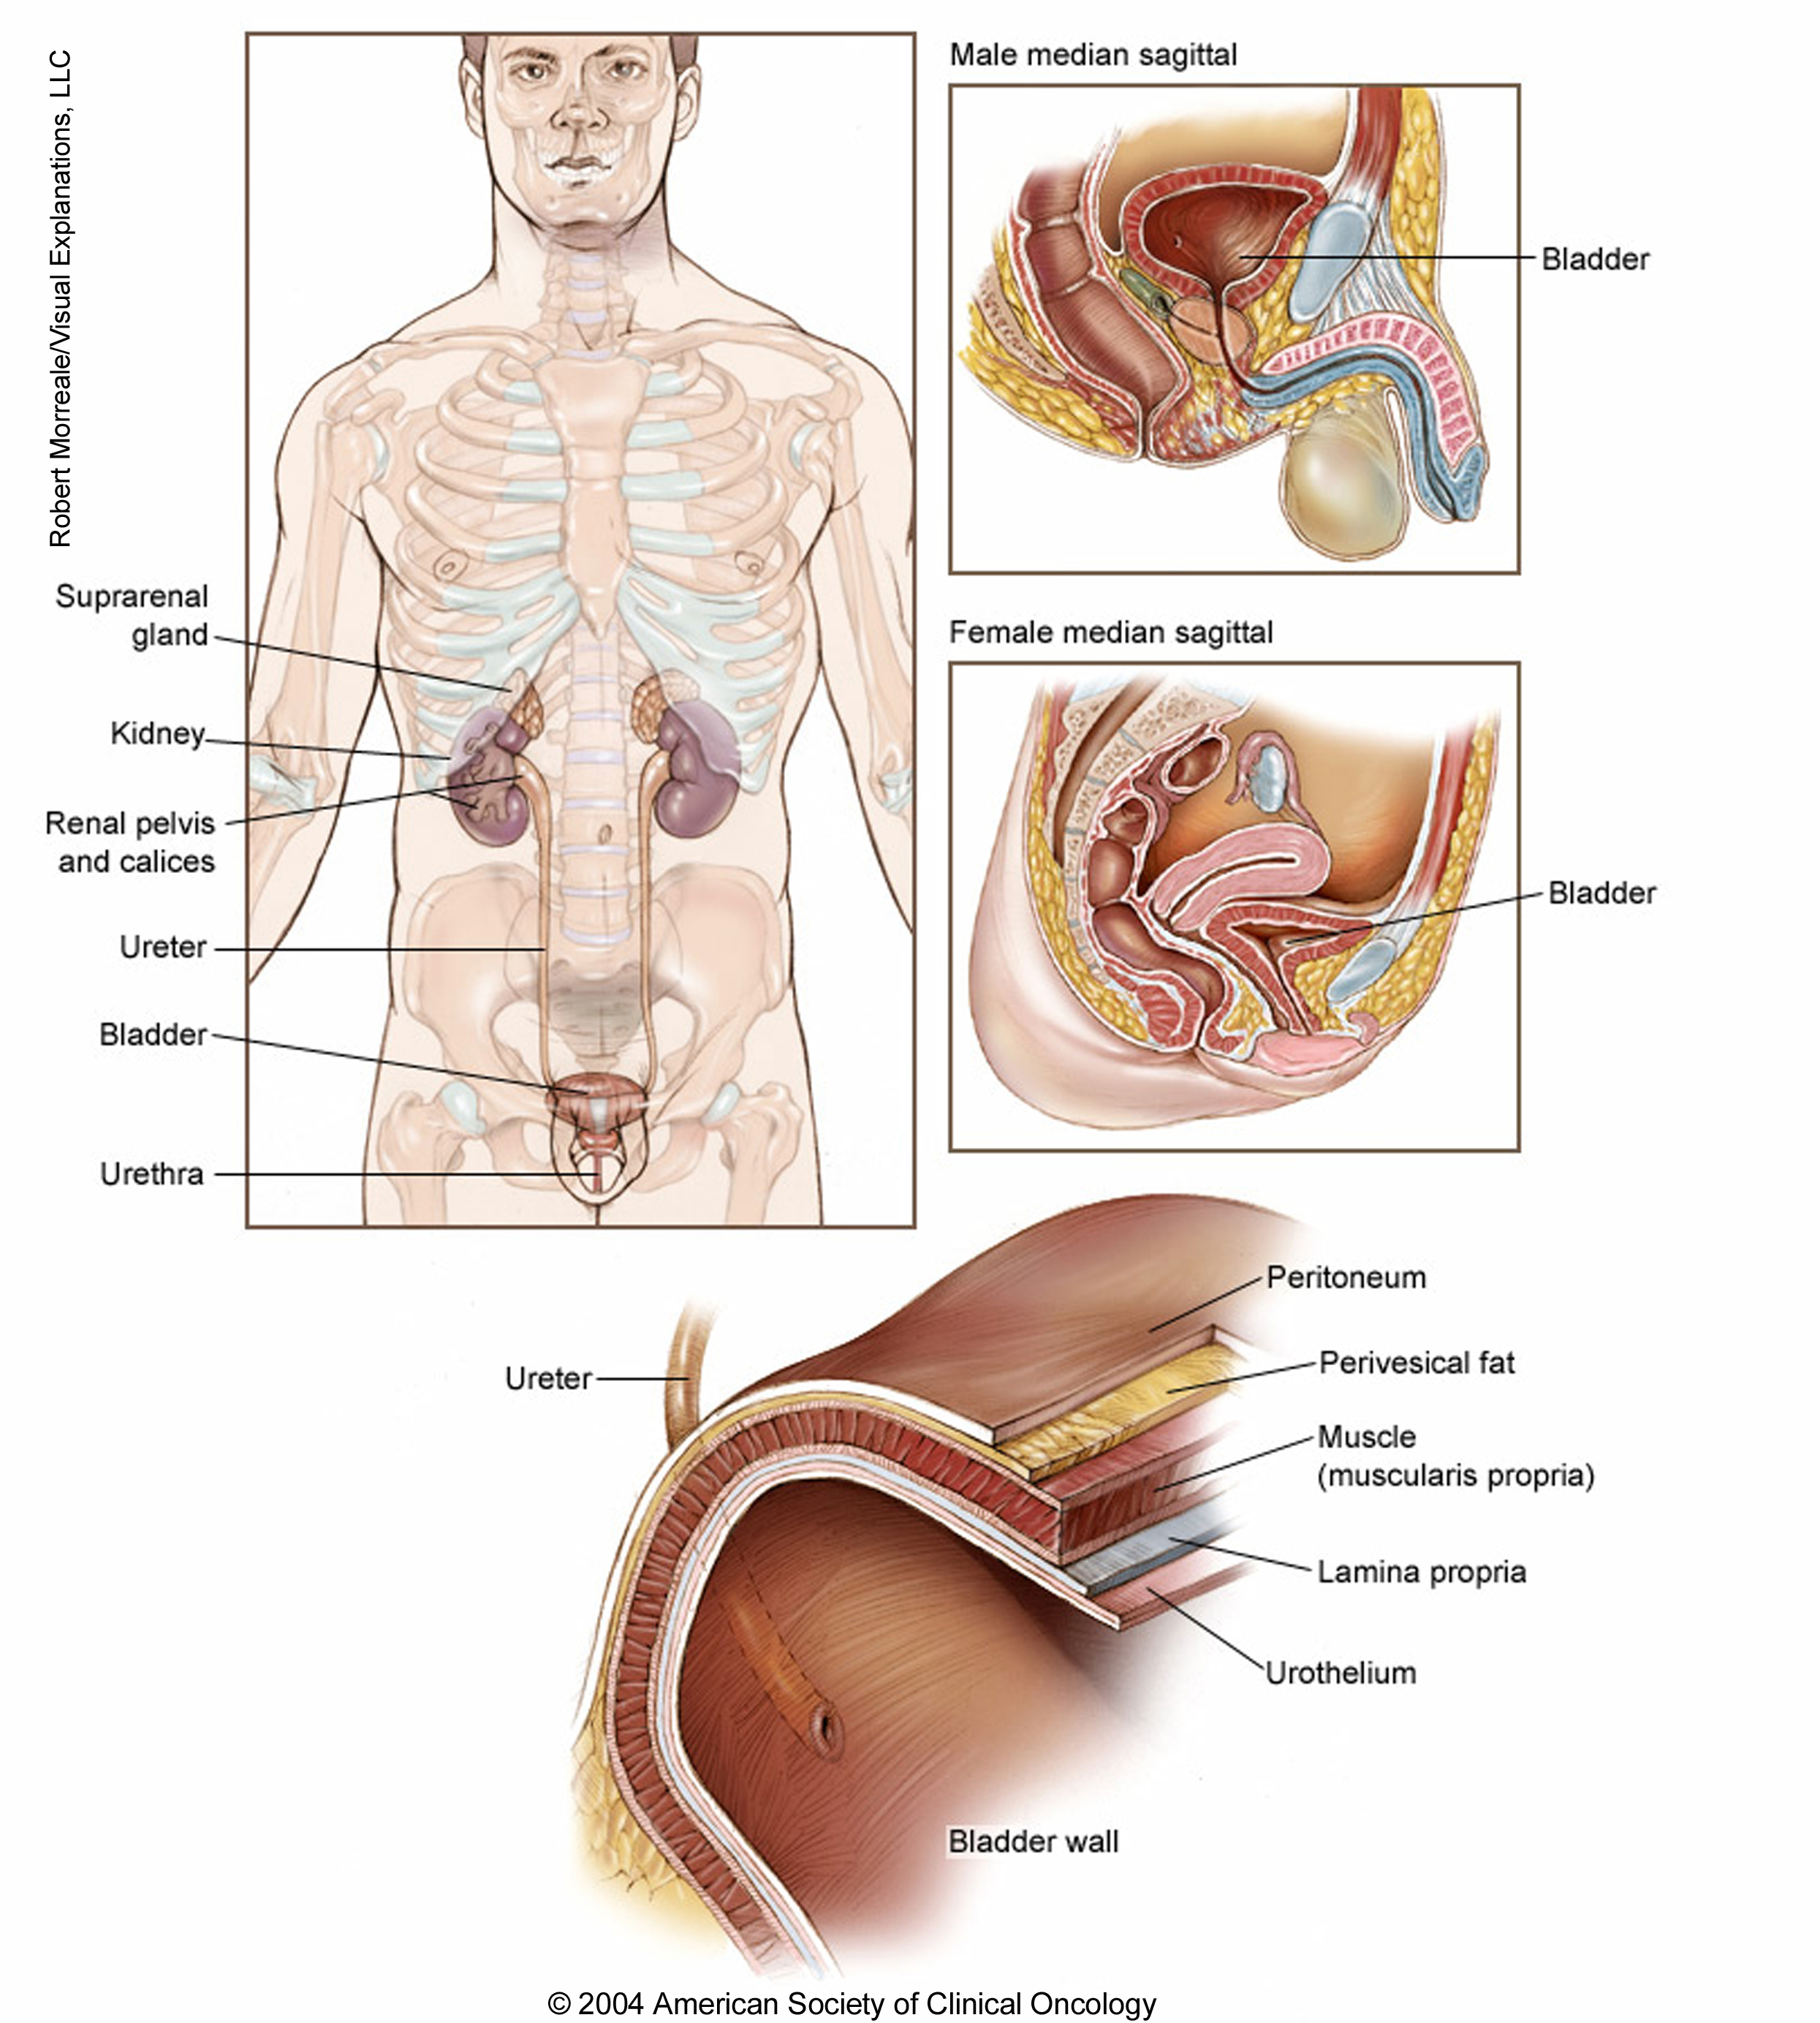 Anatomy of the bladder. See description for more information.